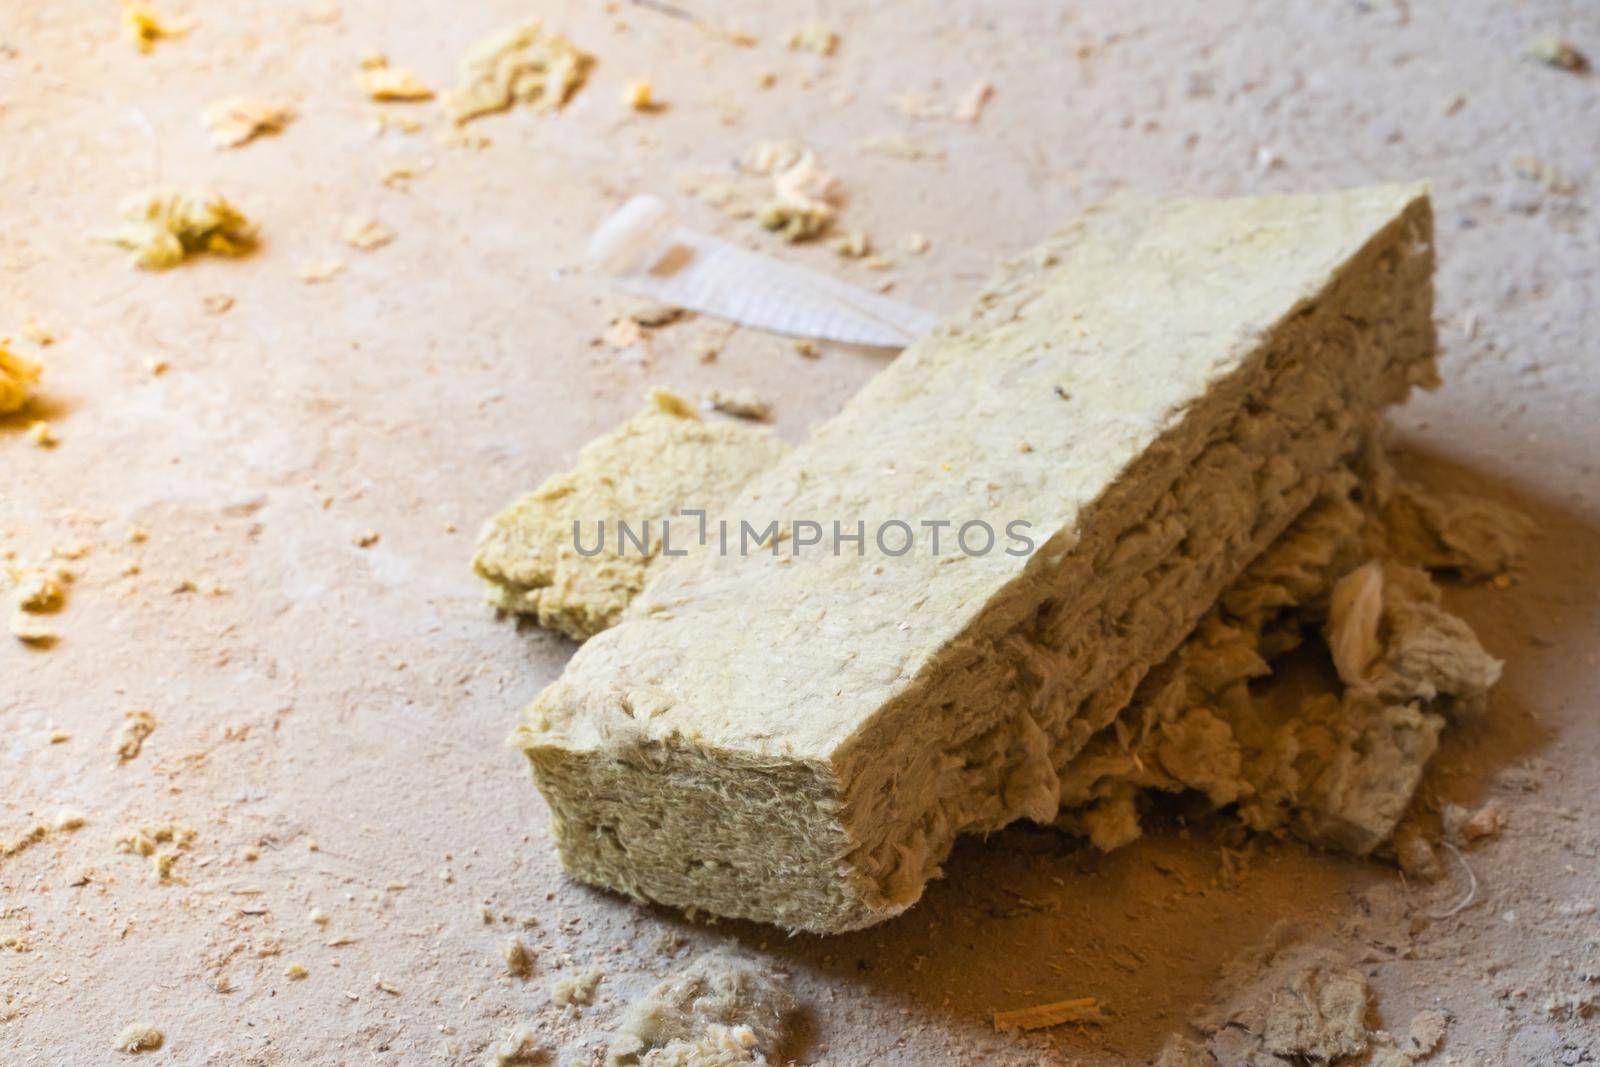 Scraps of mineral wool insulation sheet lie on the floor